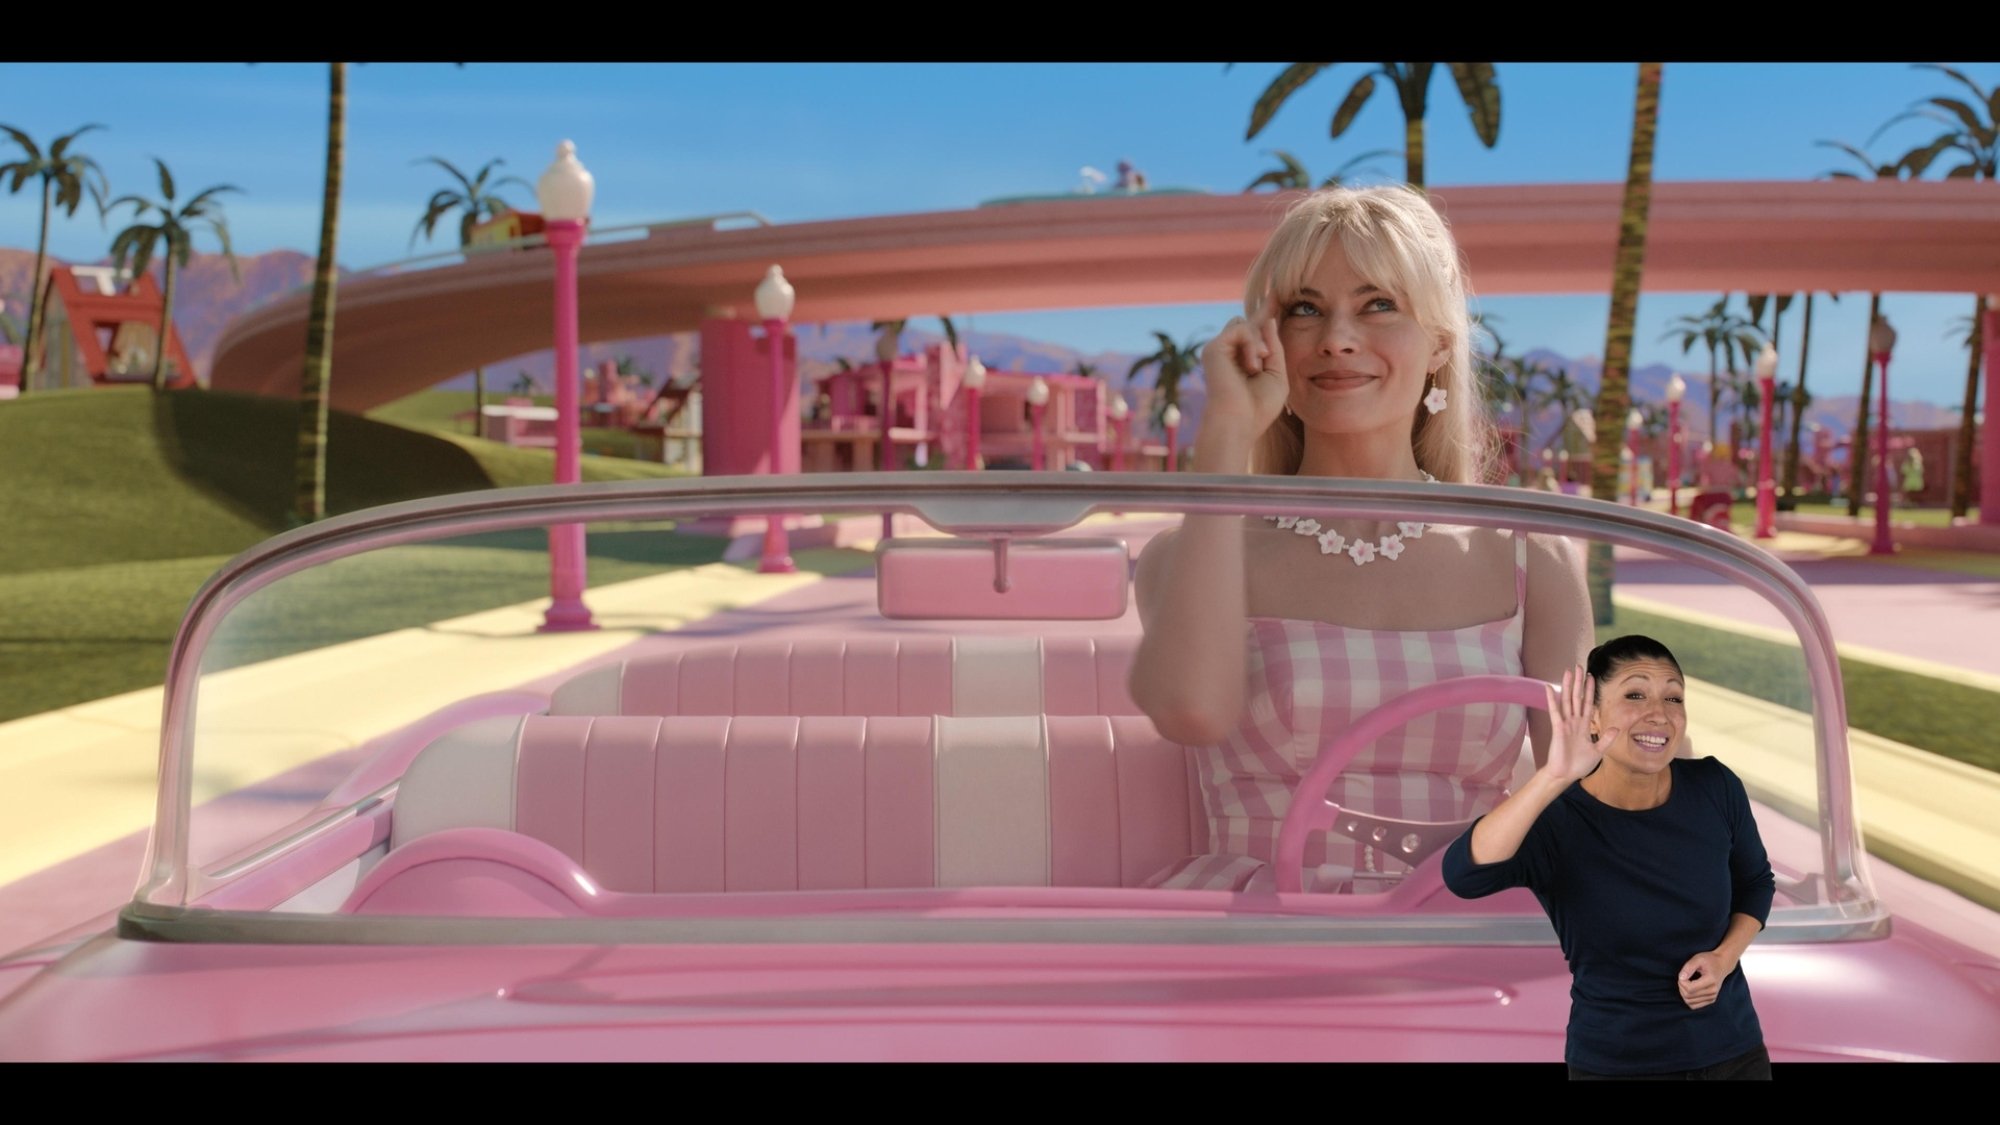 Margot Robbie as Barbie drives a pink convertible. A woman in a black shirt interprets in ASL in the bottom right corner.